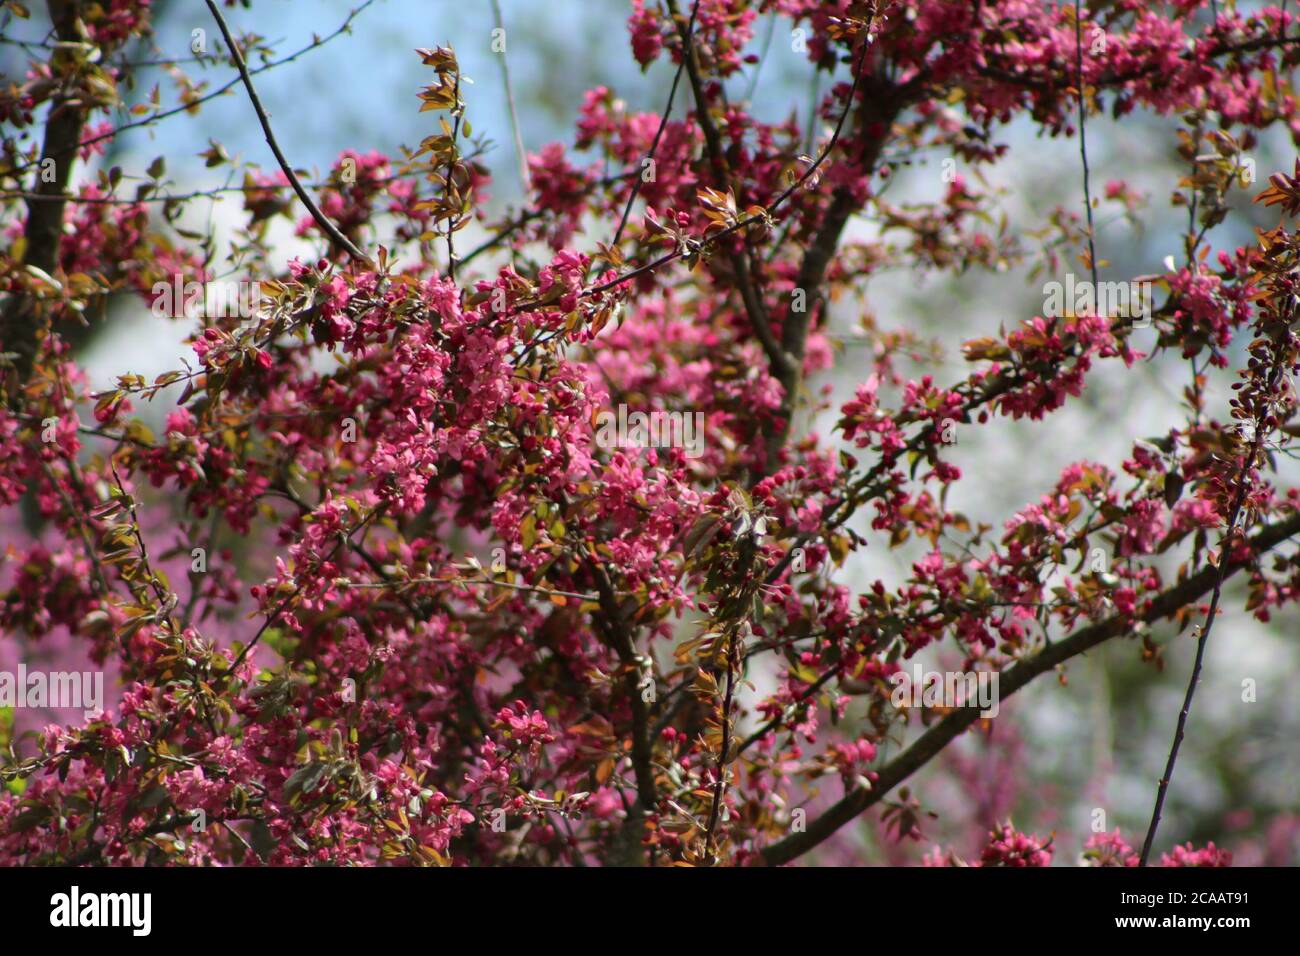 Tree/Bush with pink flowers on it. Stock Photo